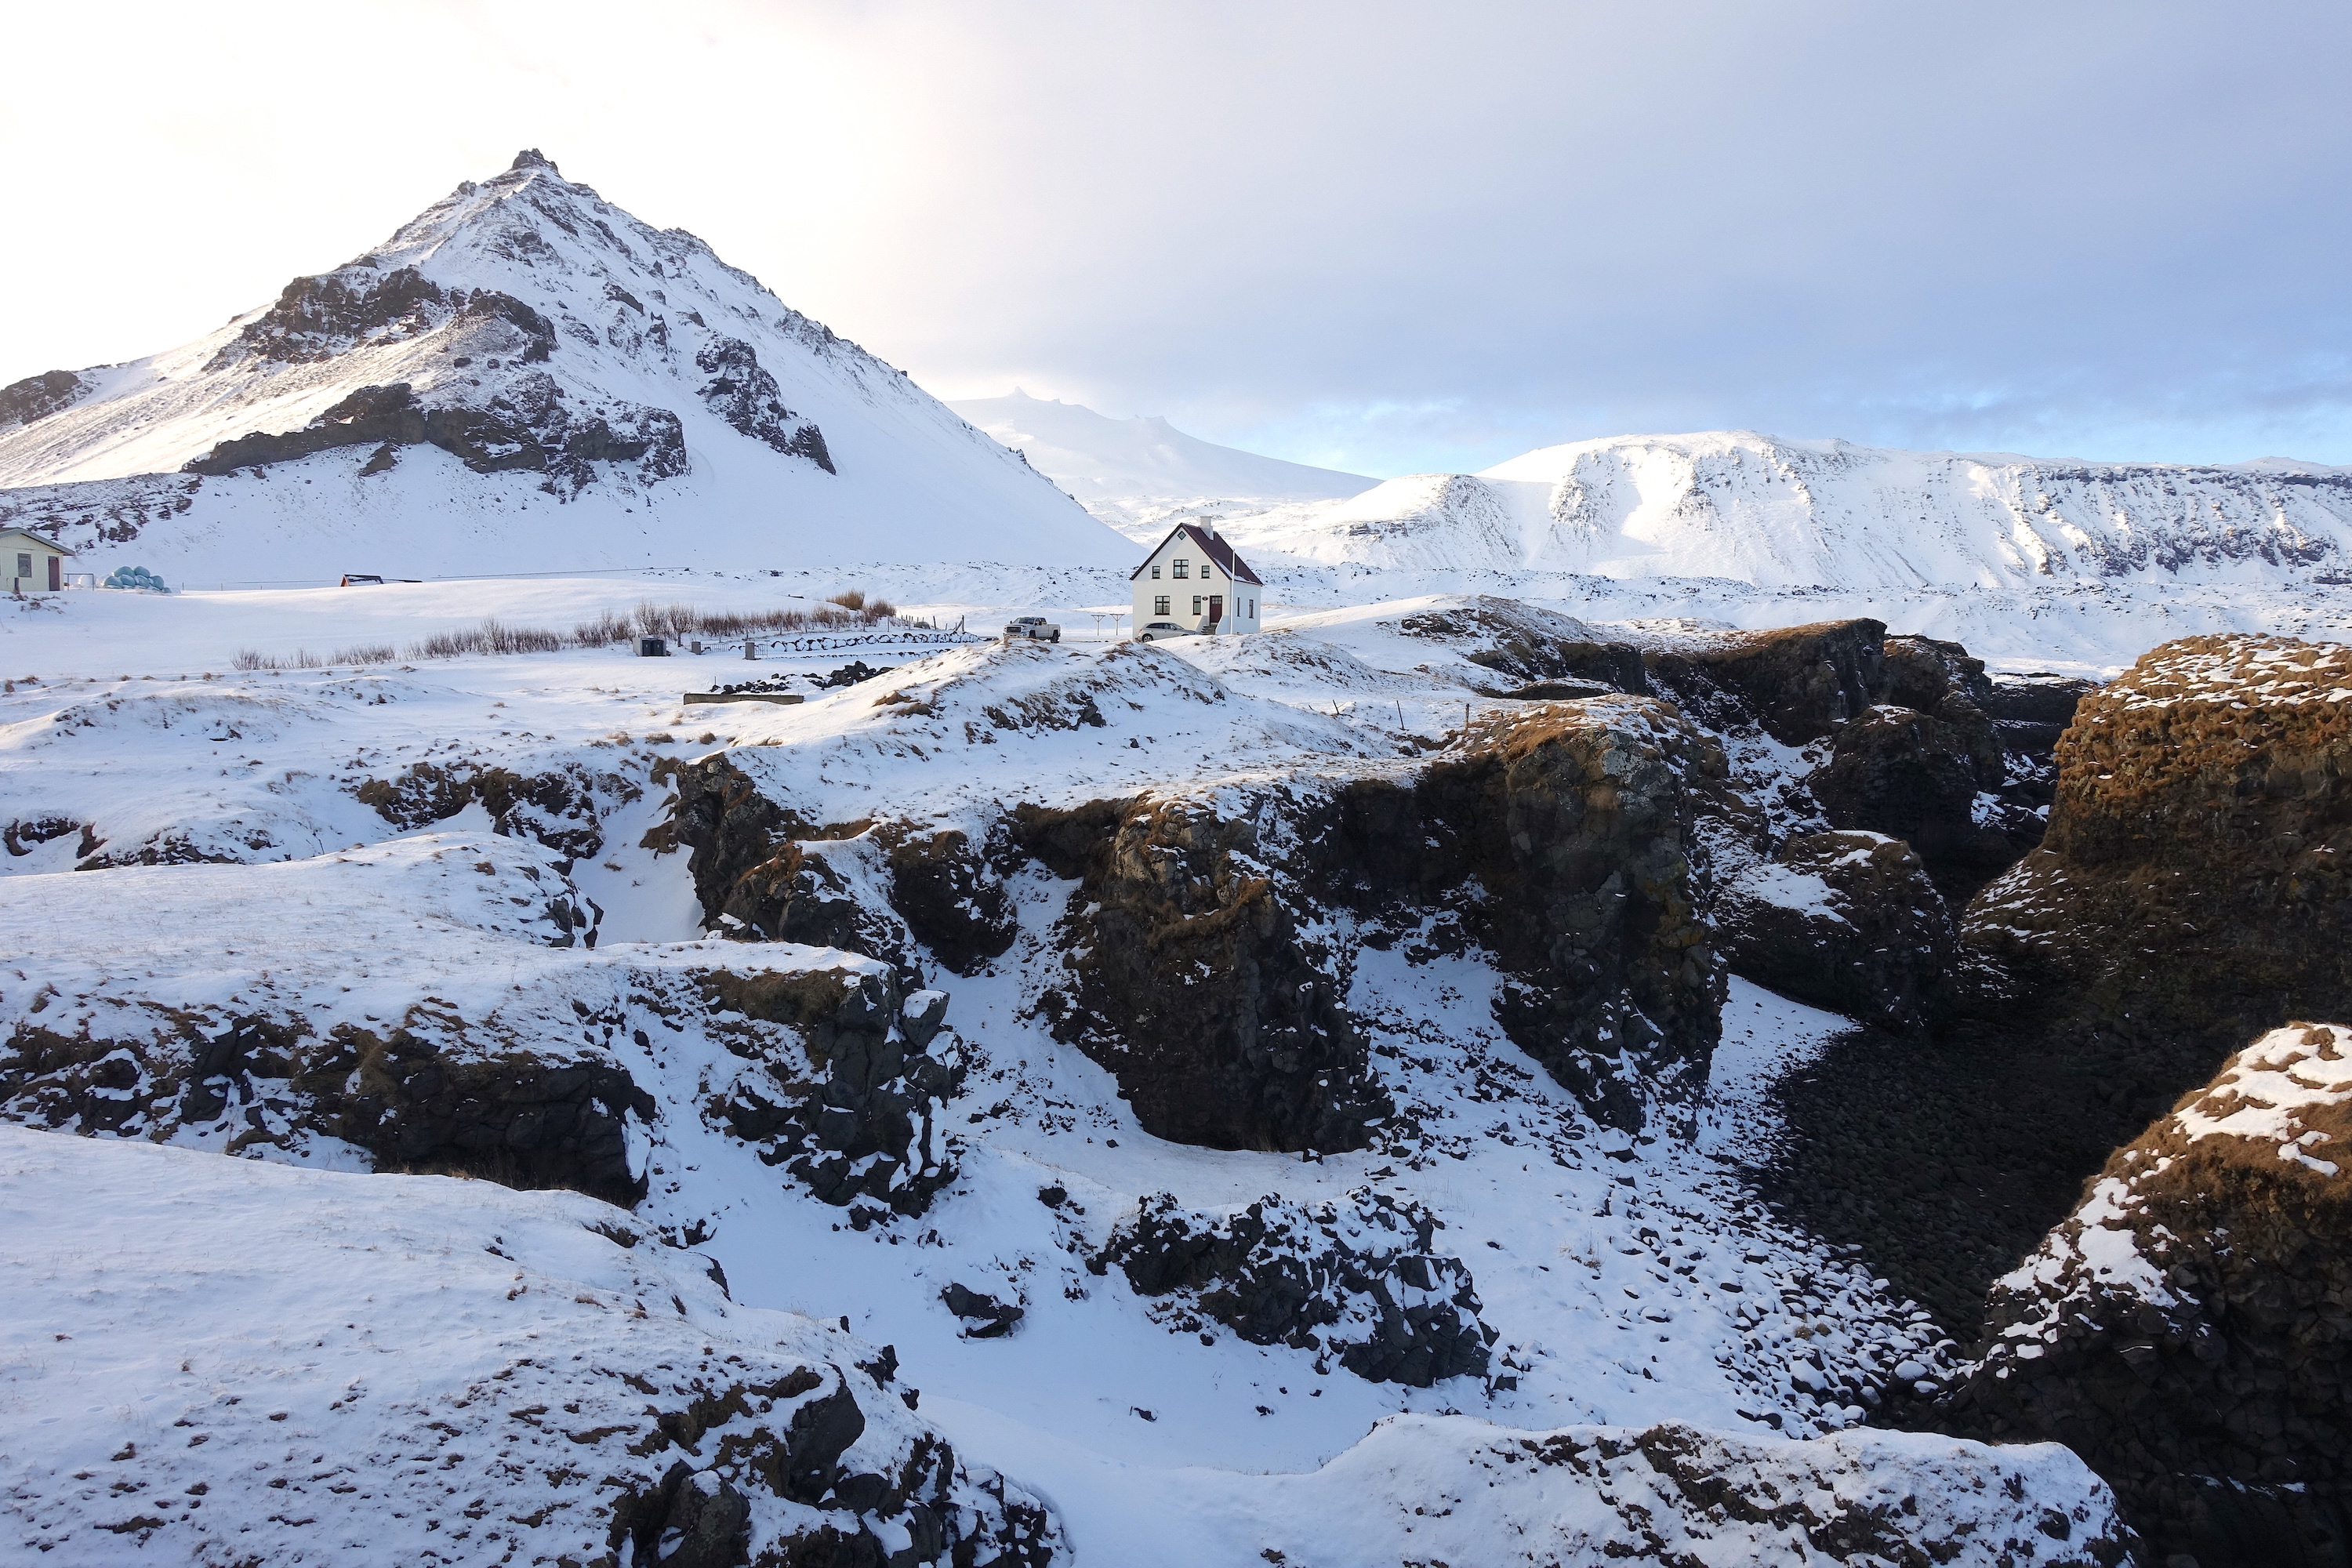 The Snæfellsnes Peninsula is also known as Miniature Iceland, so you can expect a wealth of differing sites and landmarks over your two days here.